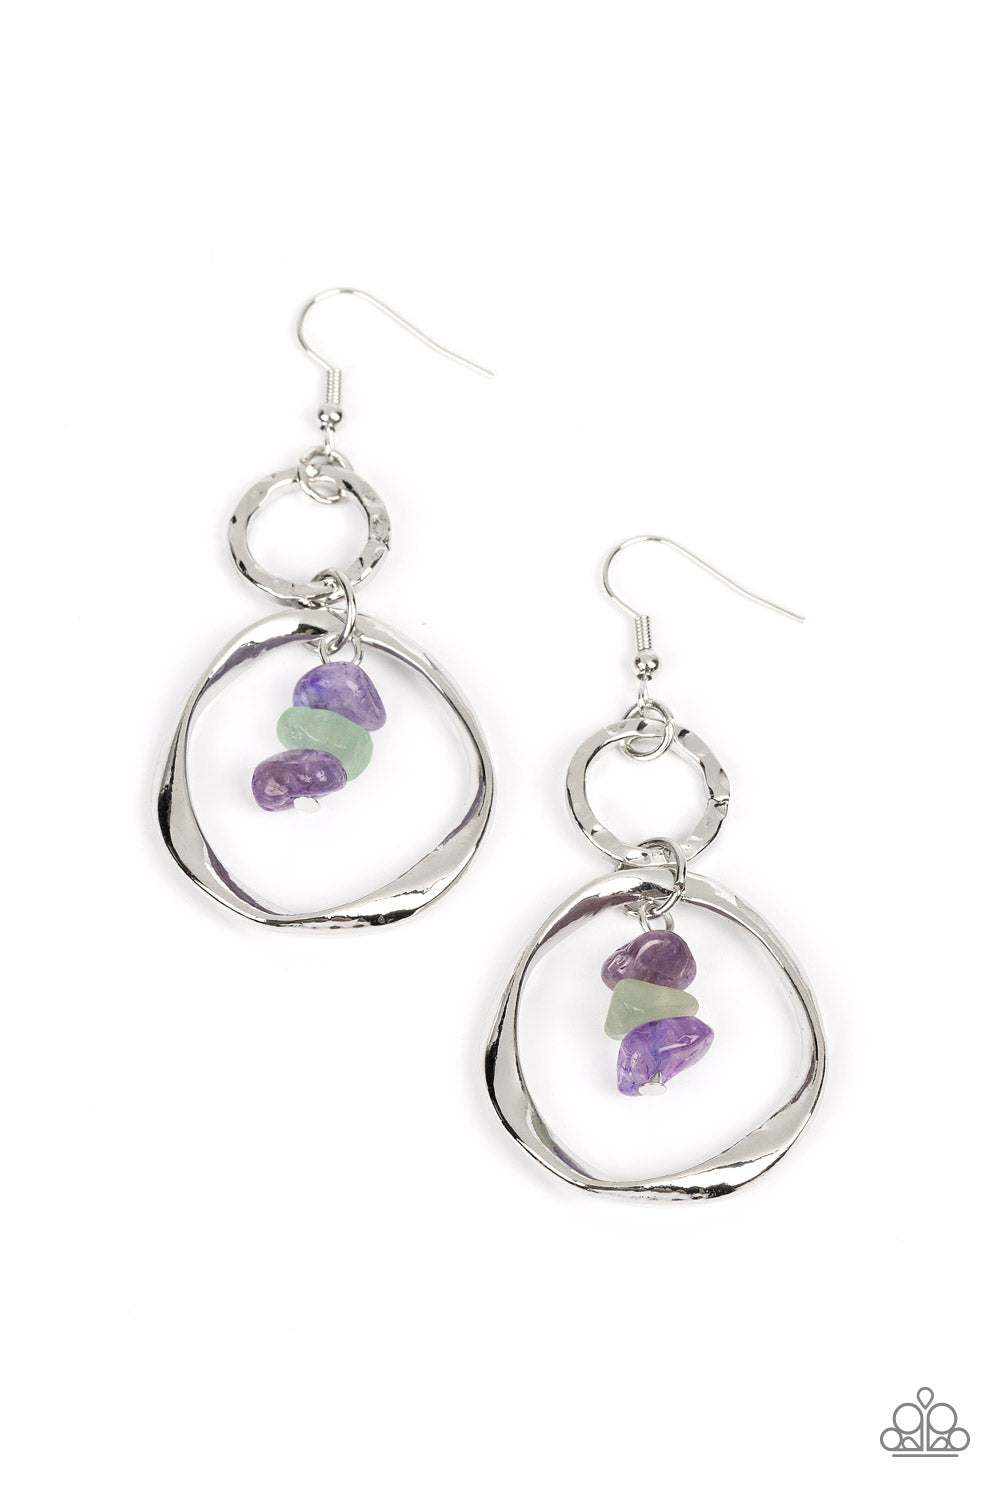 Good-Natured Spirit - Amethyst and Jade Earrings - Paparazzi Accessories - A warped silver hoop links with a hammered silver hoop, interlocking into a rustic lure. Threaded along a metal rod, amethyst and jade pebbles trickle from the top of the lowermost hoop for a tranquil finish. Earring attaches to a standard fishhook fitting. Sold as one pair of earrings.